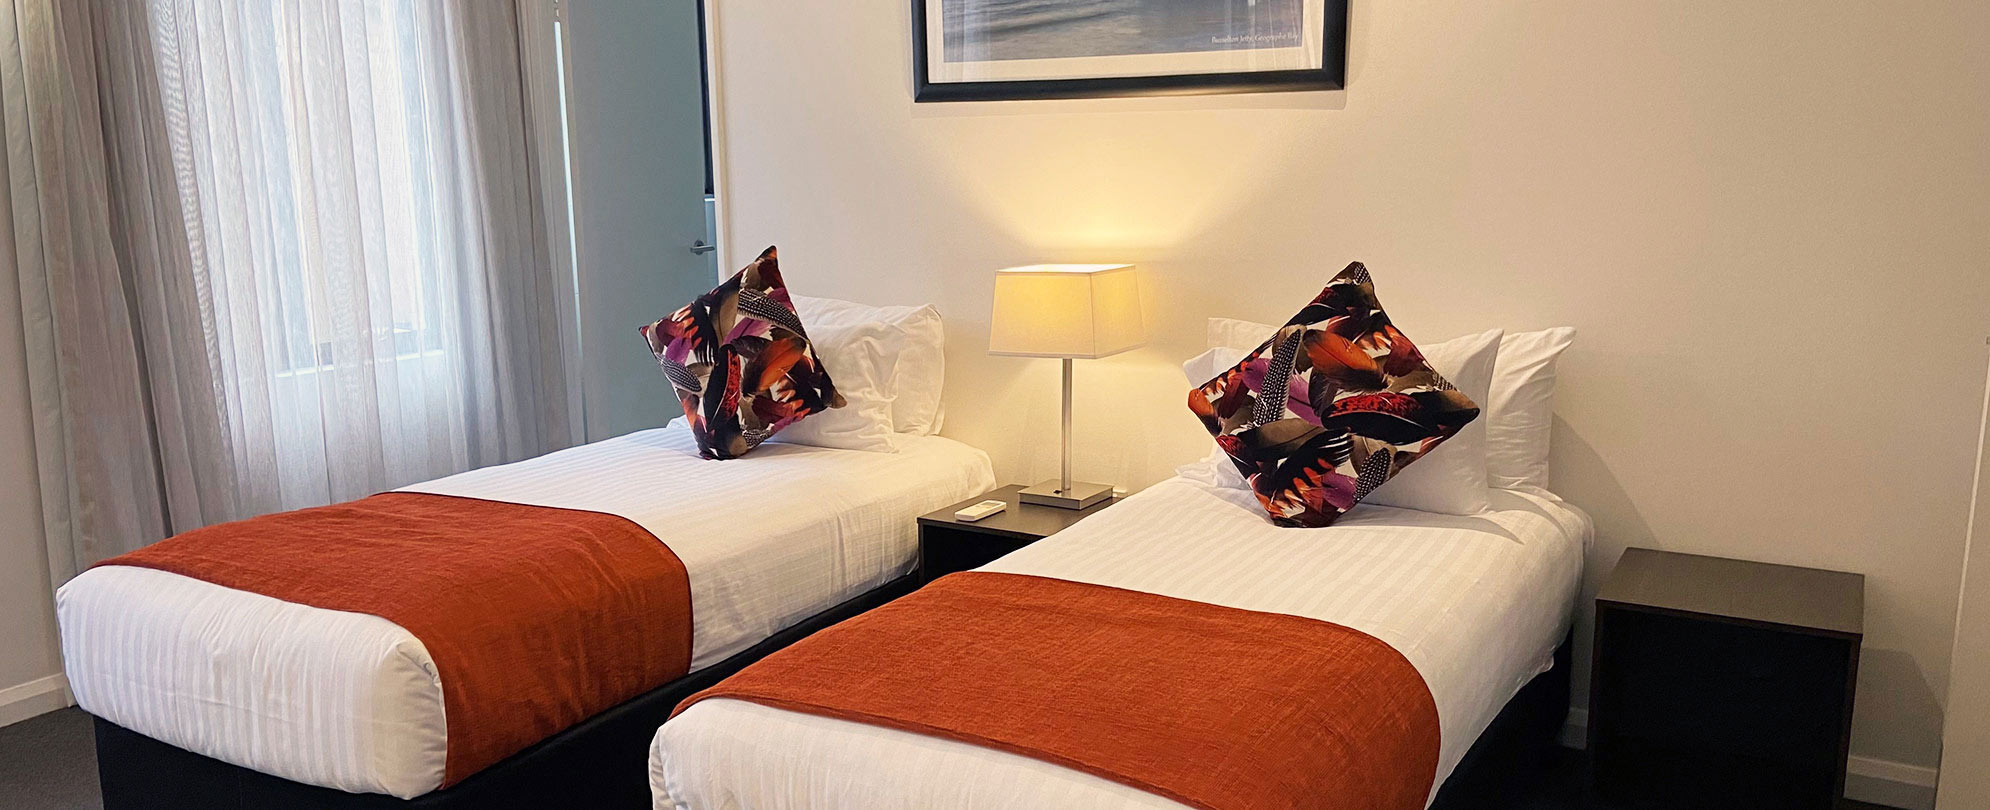 Two twin-sized beds neatly made inside a suite at Club Wyndham Perth.